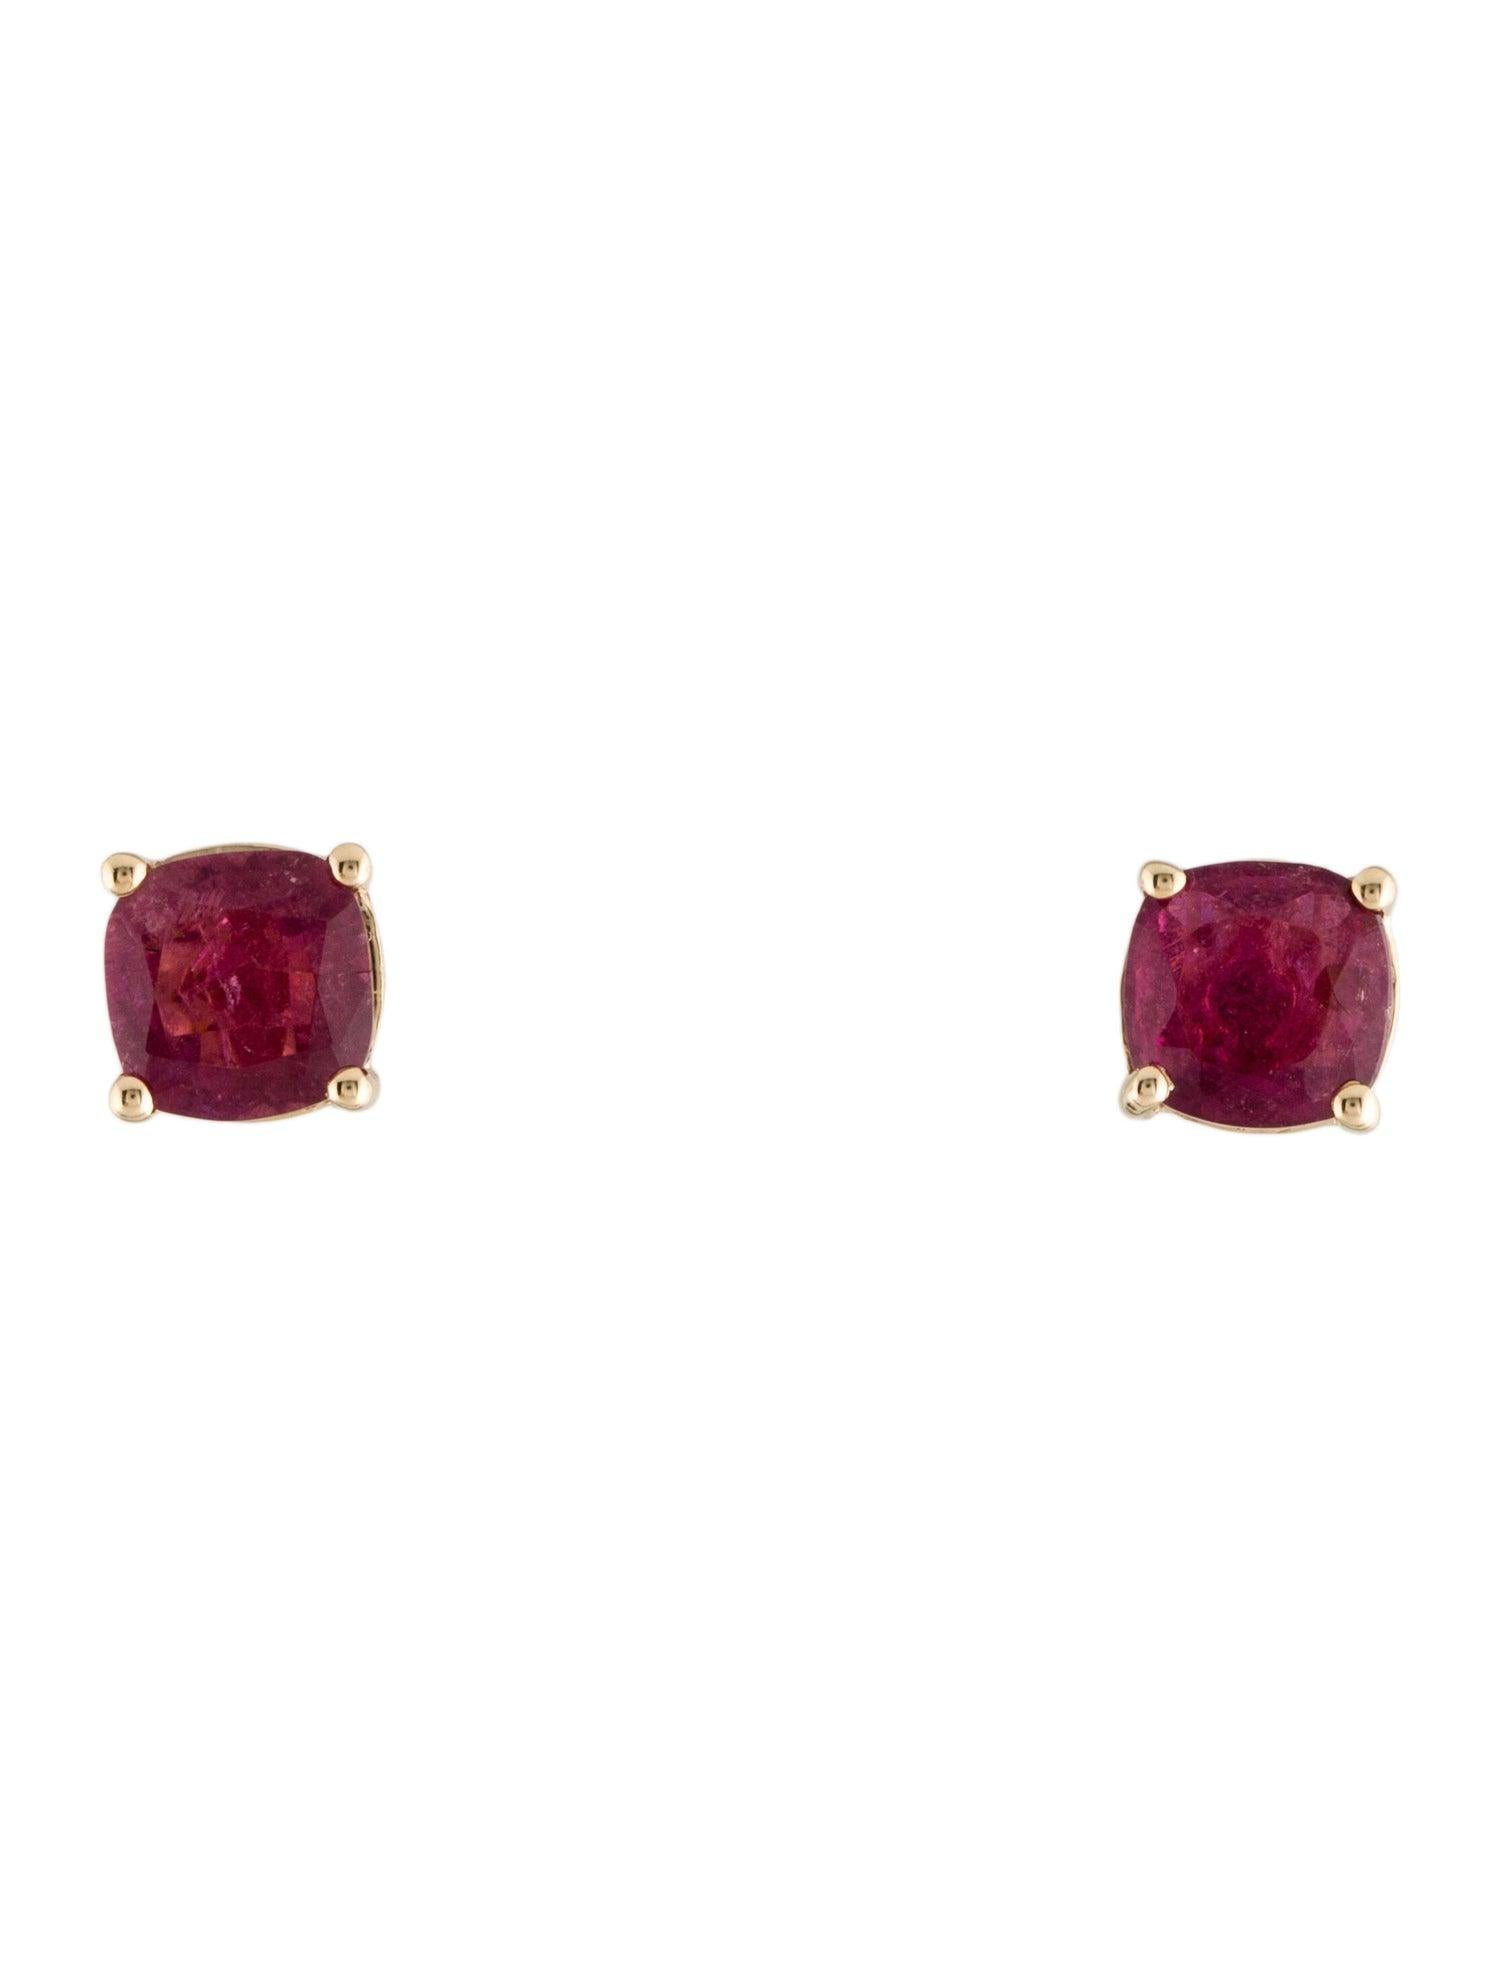 Indulge in the exquisite allure of our Rose Radiance Rubellite Earrings from the Vibrant Pink Treasures collection. Crafted with precision and passion by Jeweltique, these earrings are a testament to the captivating beauty of rubellite, a gem as